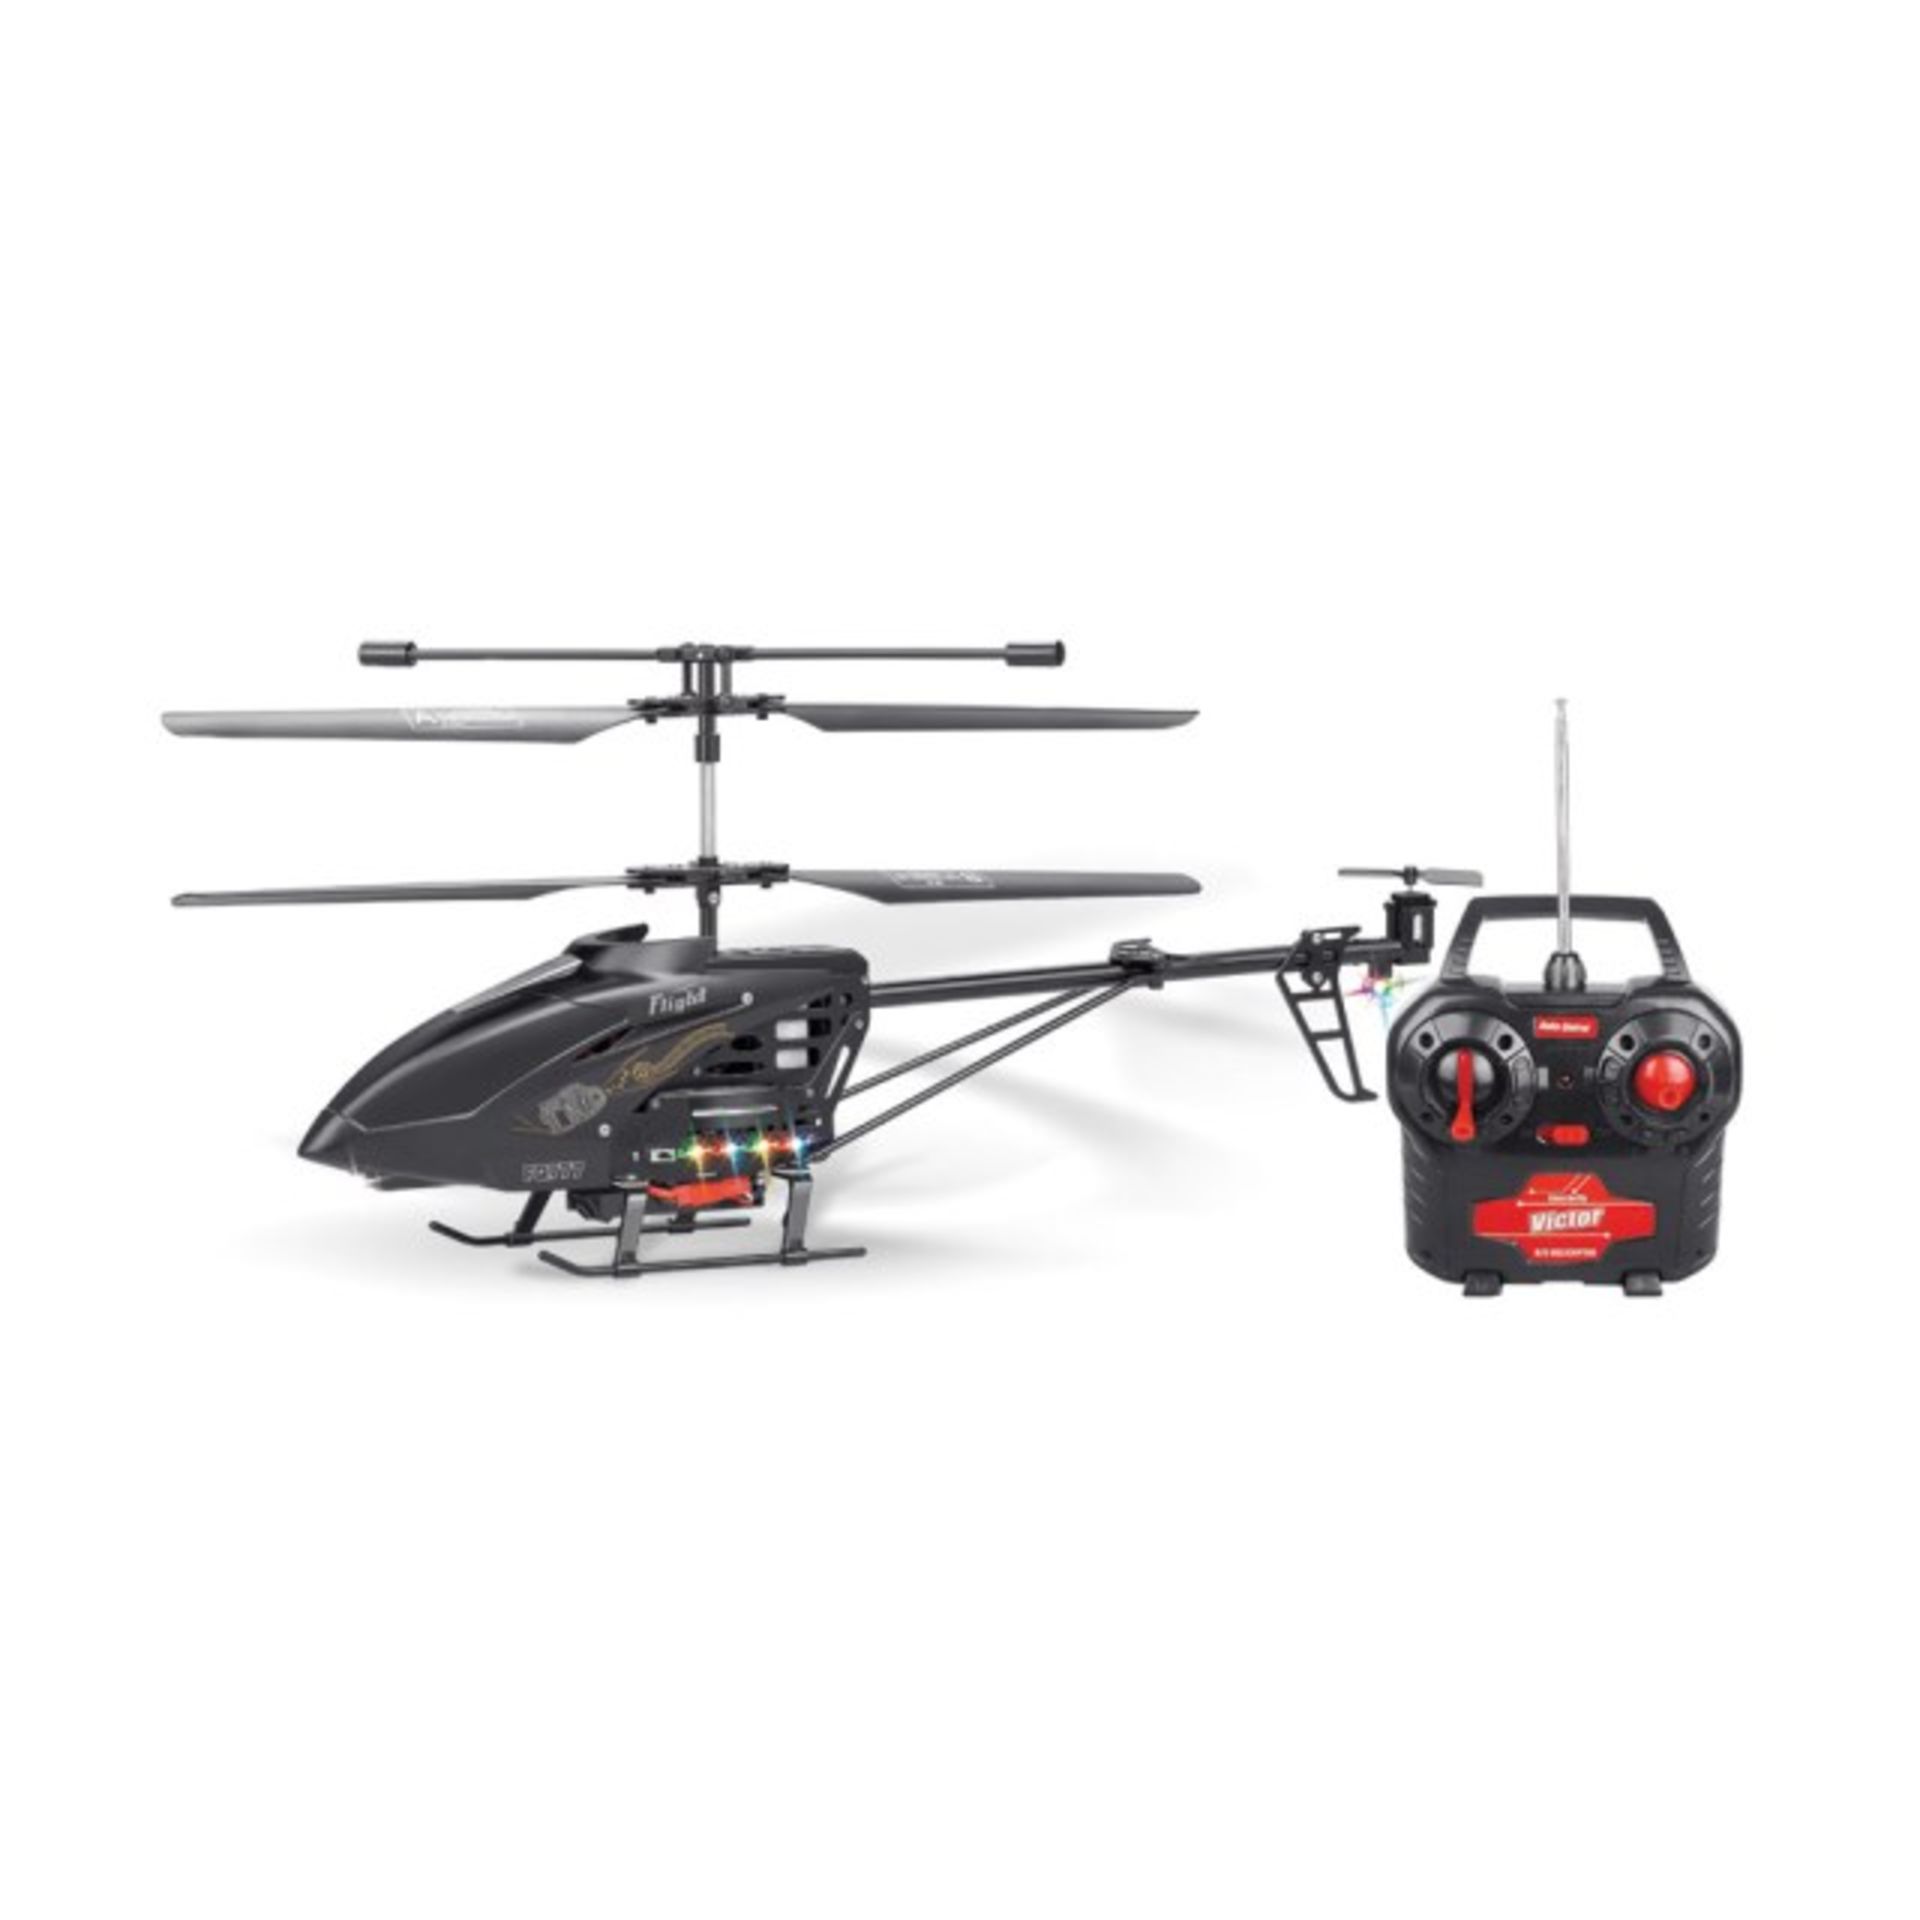 V Brand New Shadow Hawk Spy Helicopter With Built In Micro Photo & Video Camera & Lights -